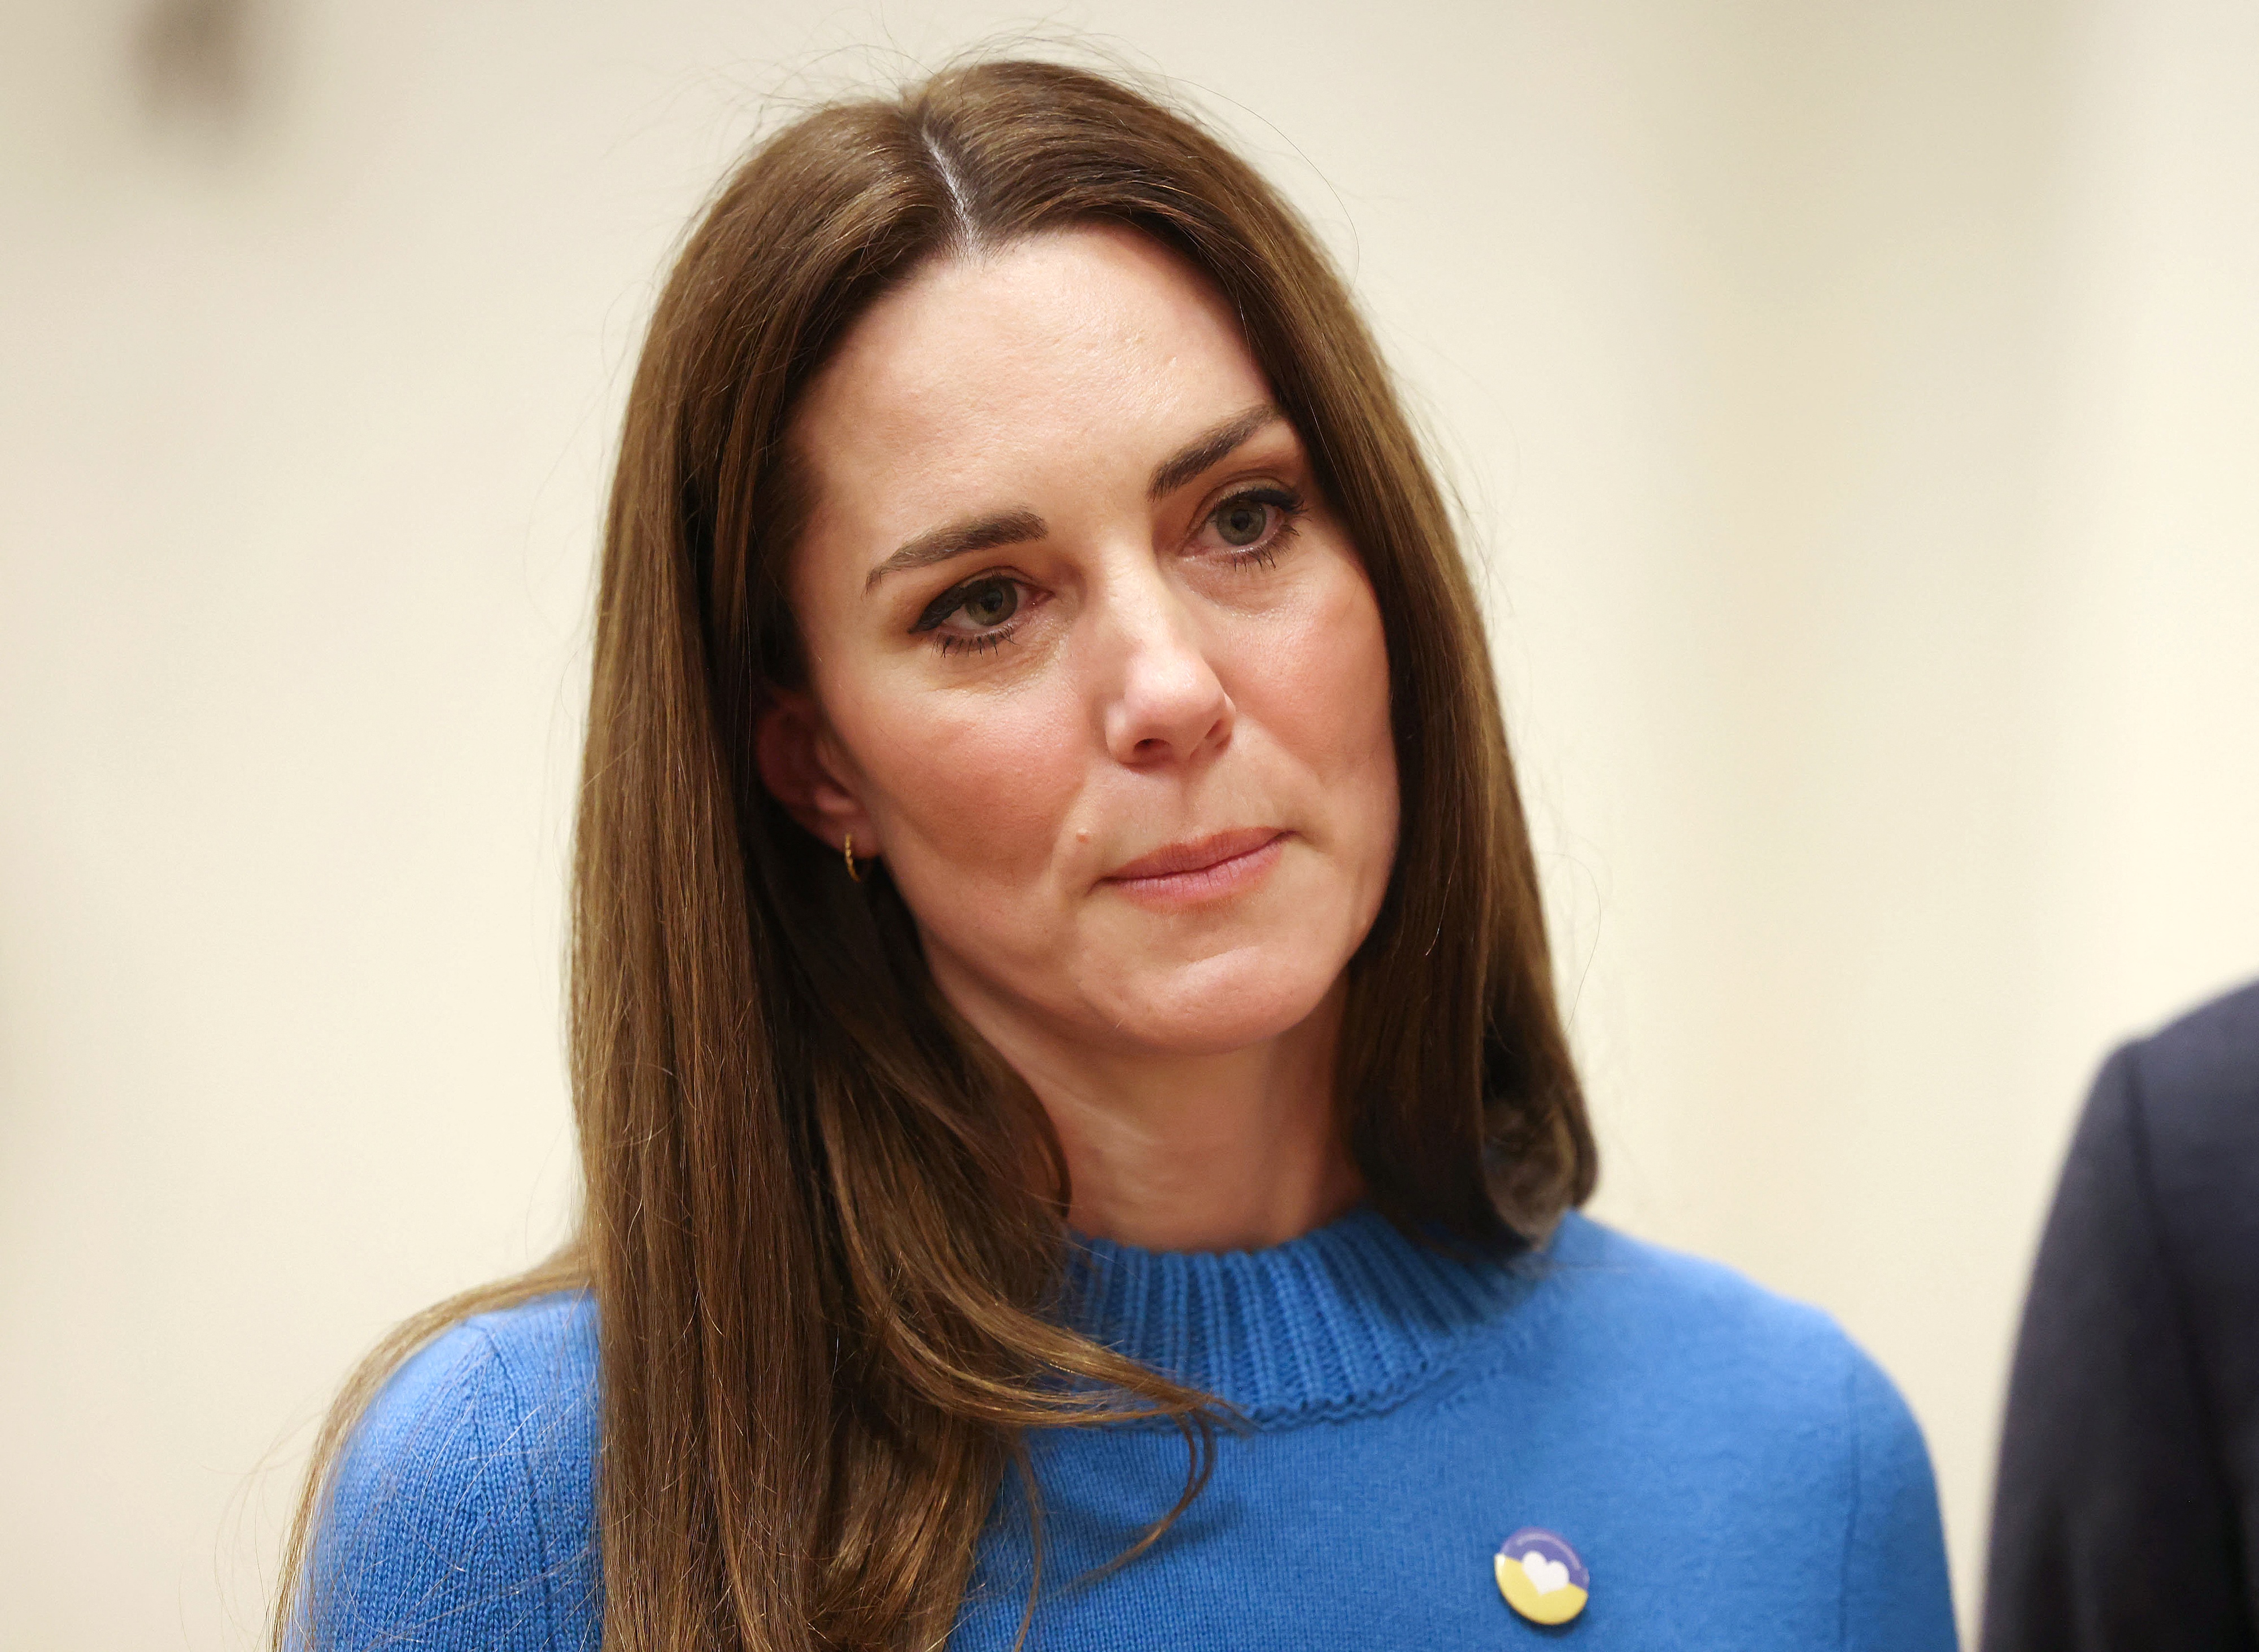 Kate Middleton during a visit to the Ukrainian Cultural Centre on March 9, 2022 in London, England. | Source: Getty Images